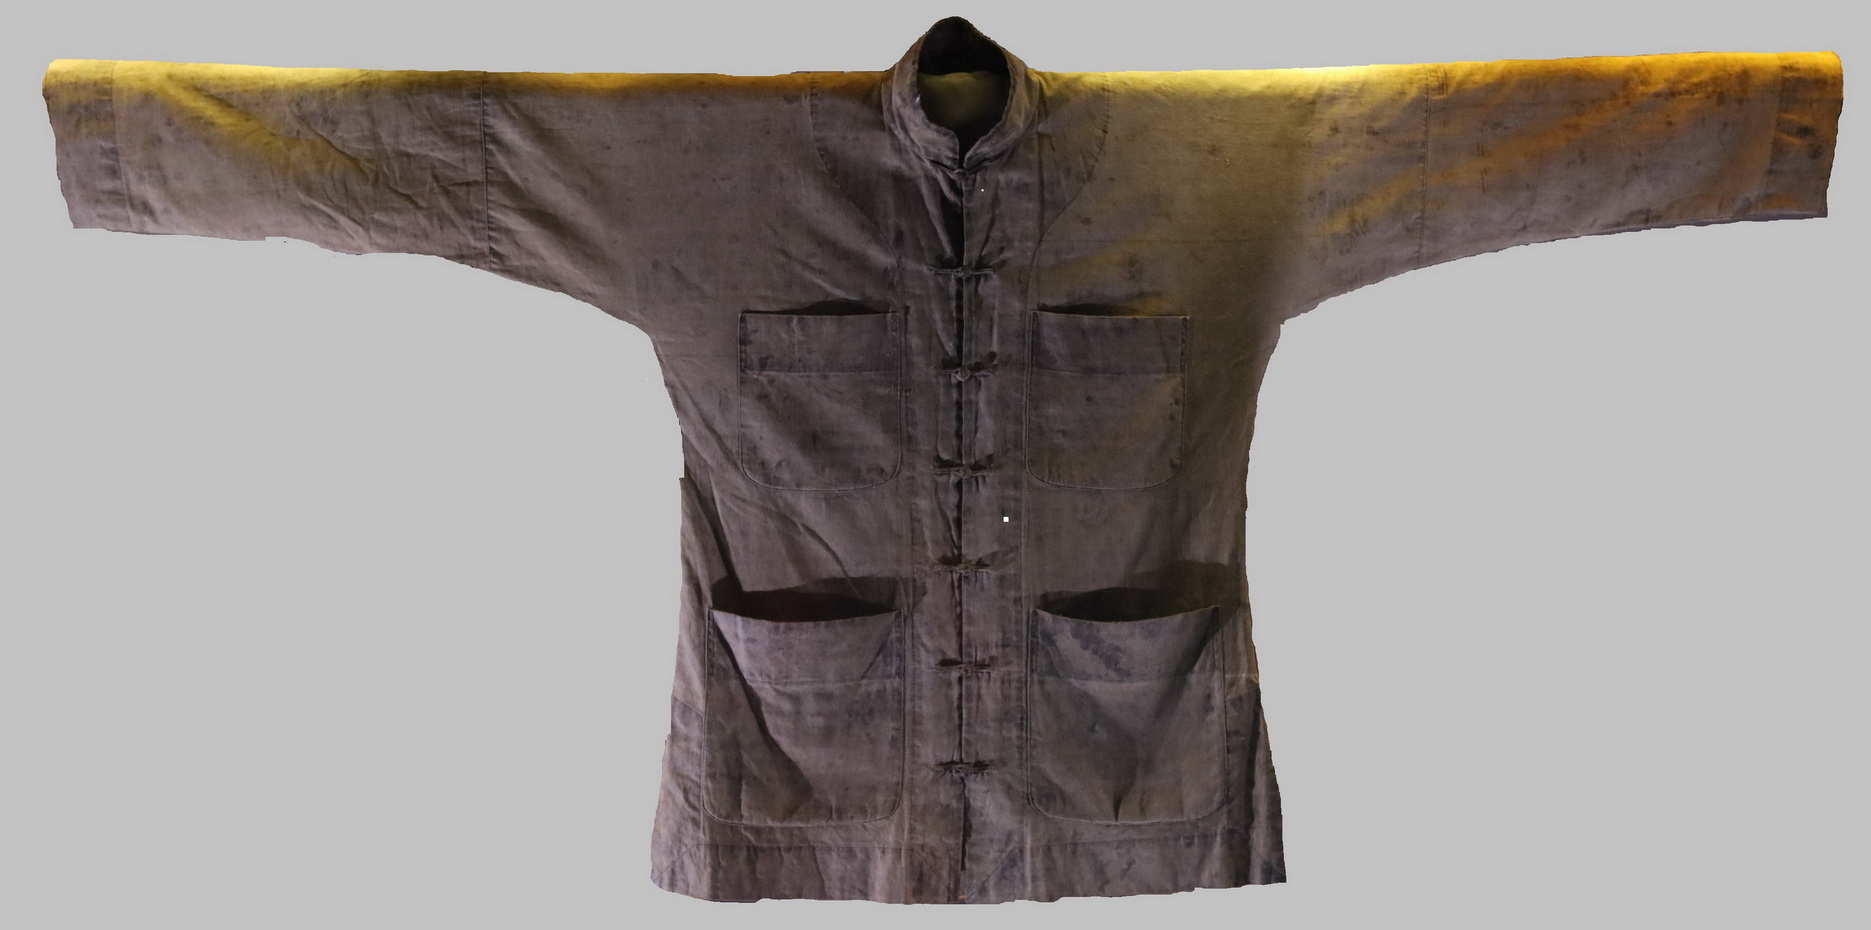 Jacket worn by a member of the Hong Kong Independent Battalion of the Dongjiang Column during the Japanese occupation